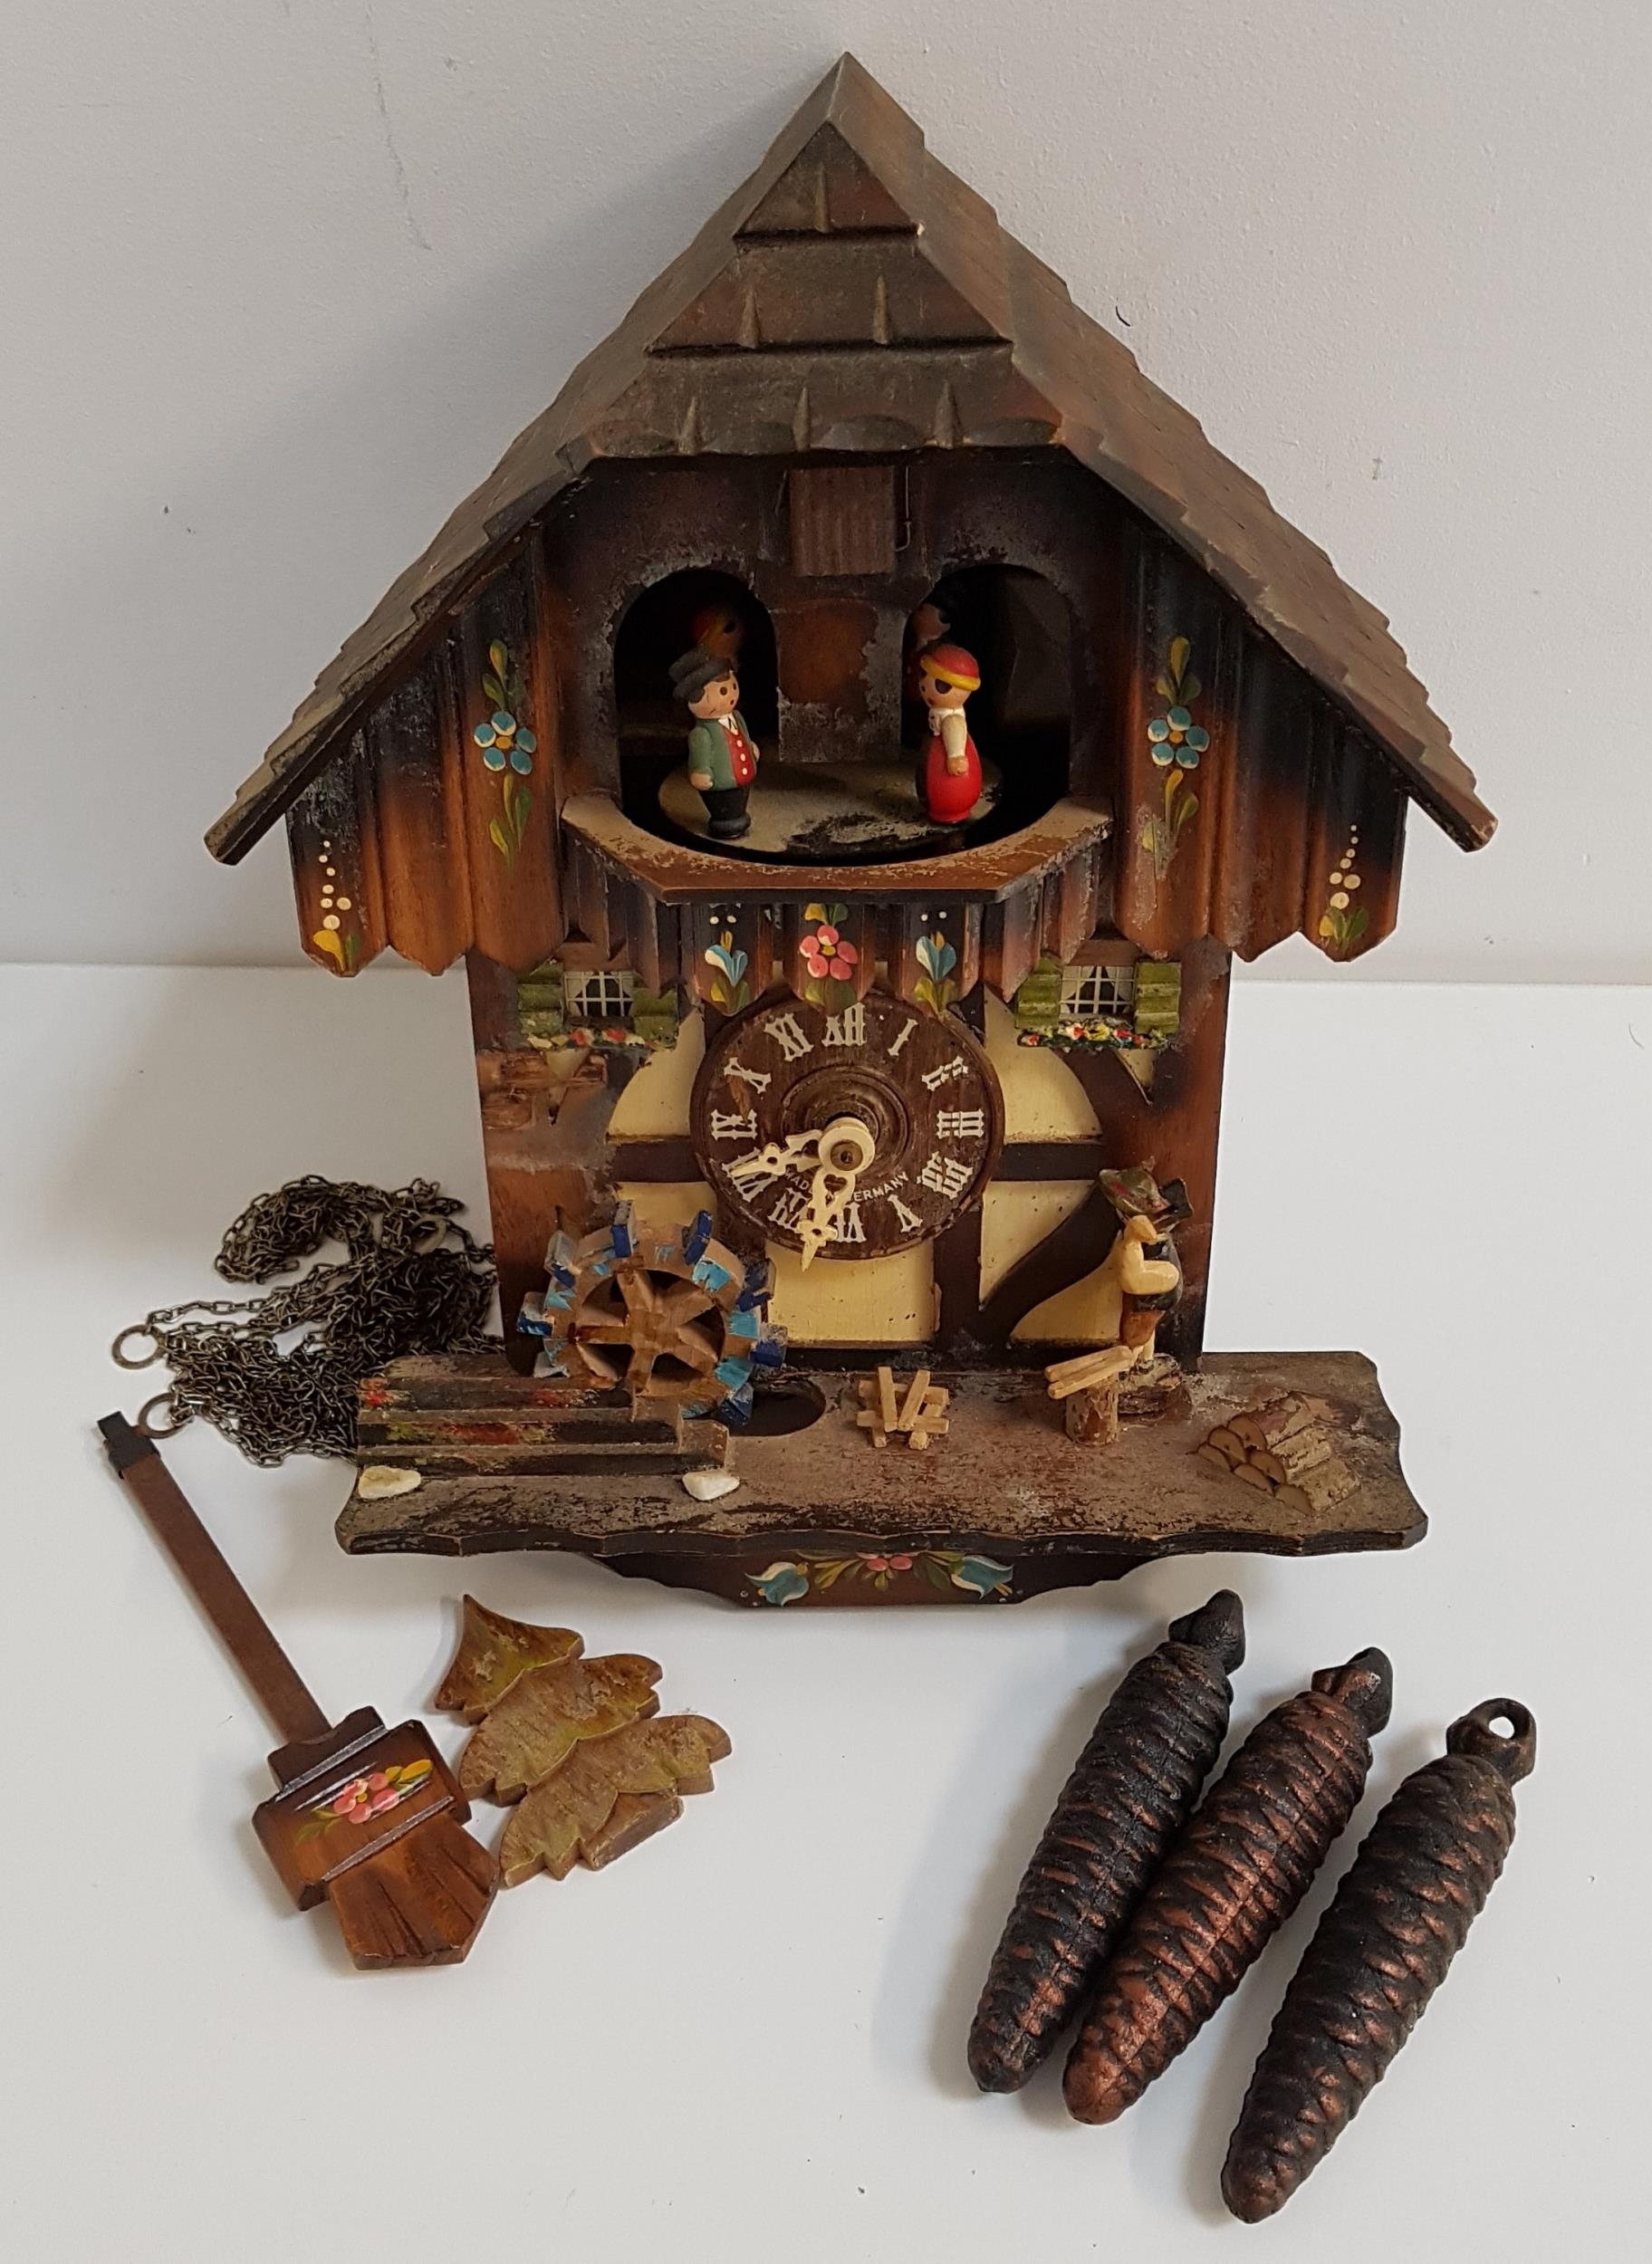 BLACK FOREST CUCKOO CLOCK the circular dial with roman numerals, with pendulum and weights